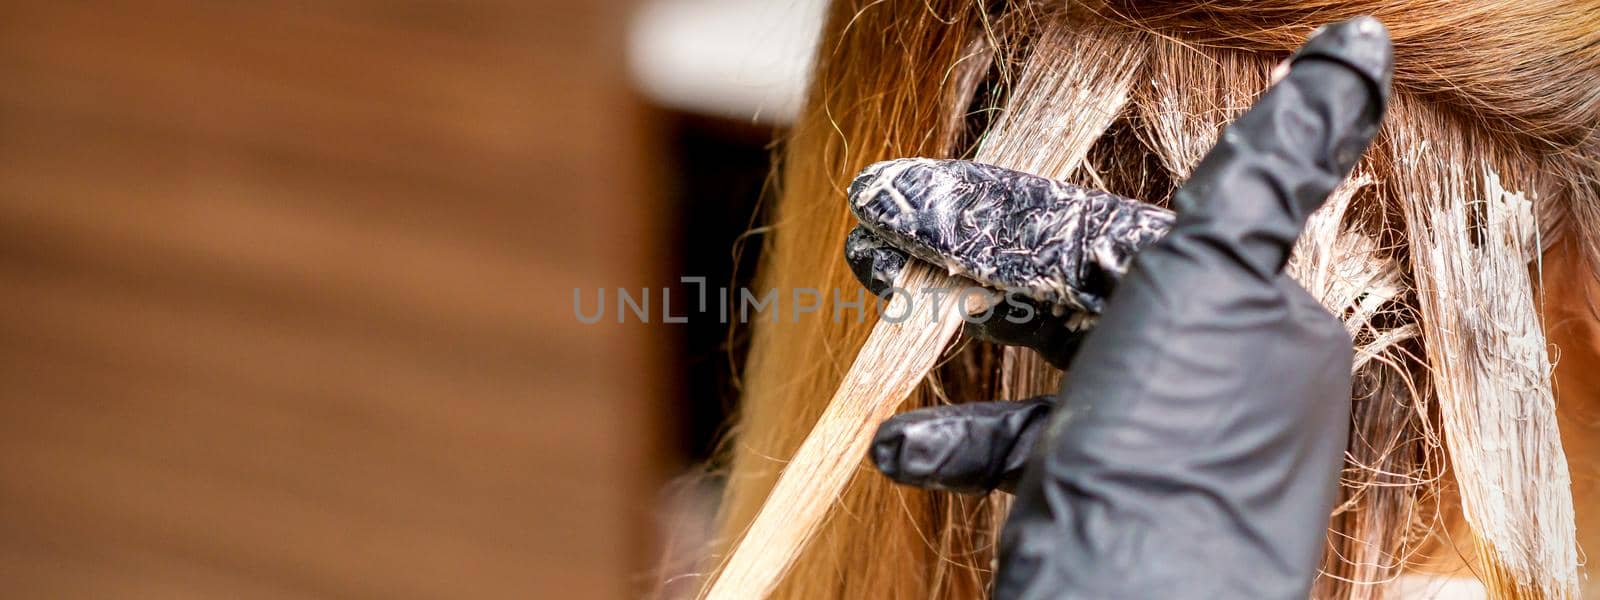 Closeup back view of hairdresser's hands in gloves applying dye to a strand of hair of redhead young woman in a hair salon